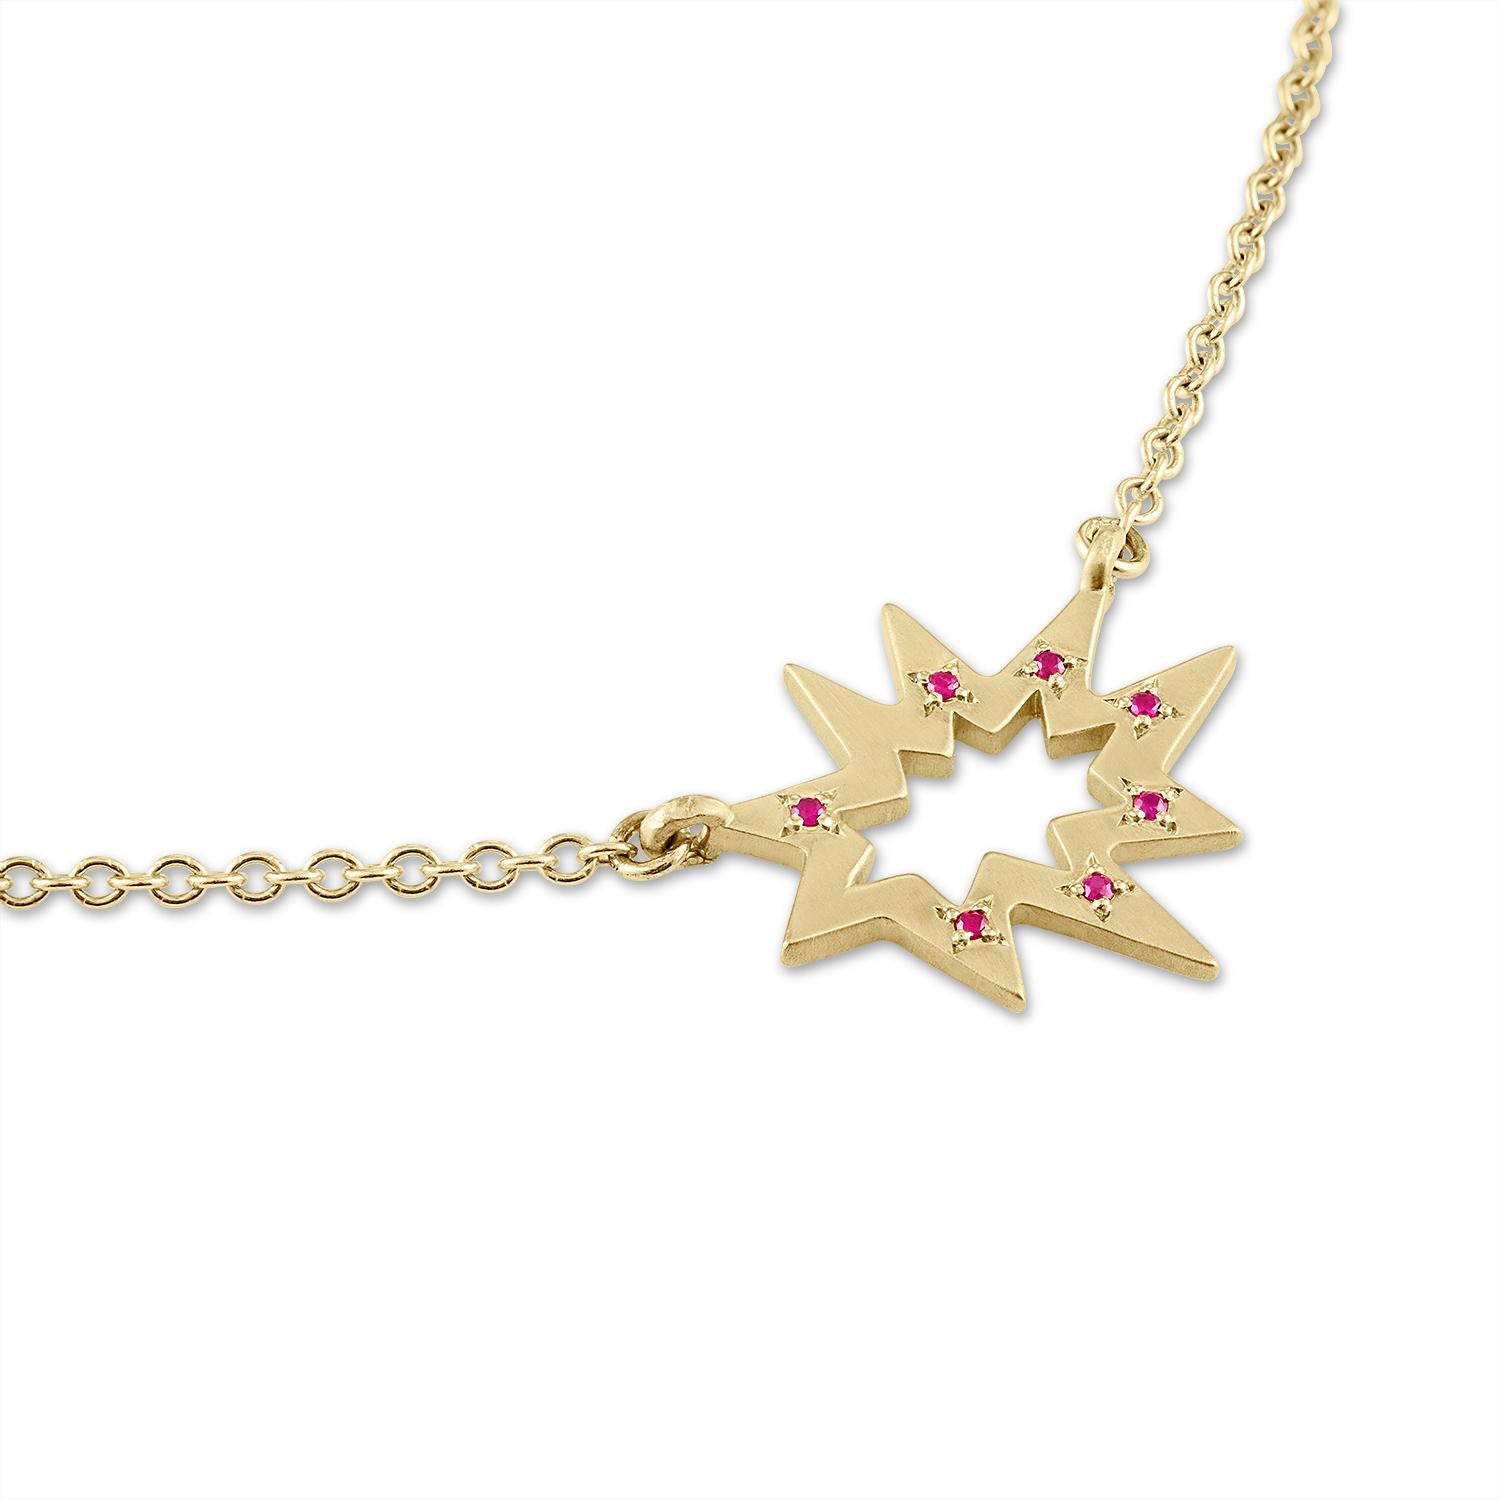 Sunny and bright! Our iconic matte gold Stellina necklace is fresher than ever in its Stellina Nova incarnation. This version features seven small rubies for some elegant razzle dazzle. Hanging on a delicate gold chain, this piece is made to accent